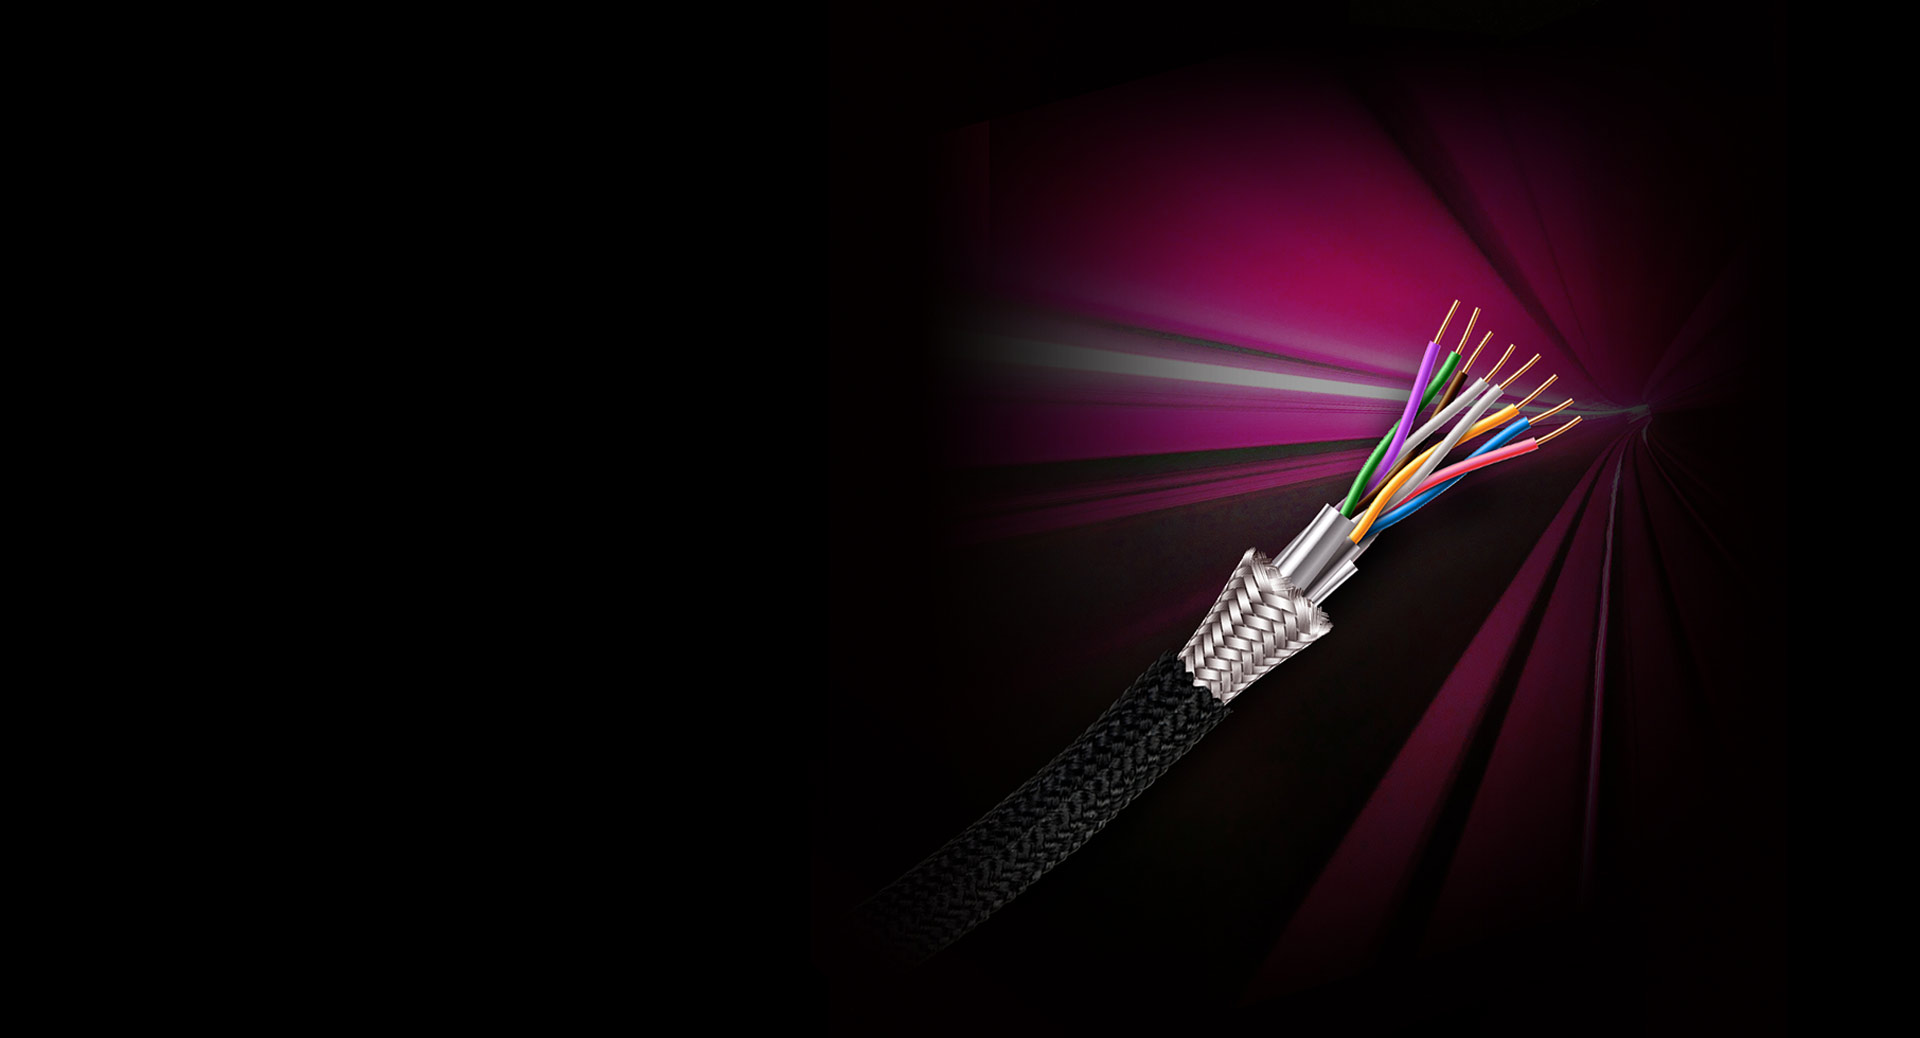 ROG CAT7 Cable aluminum foil wrapping design highlight